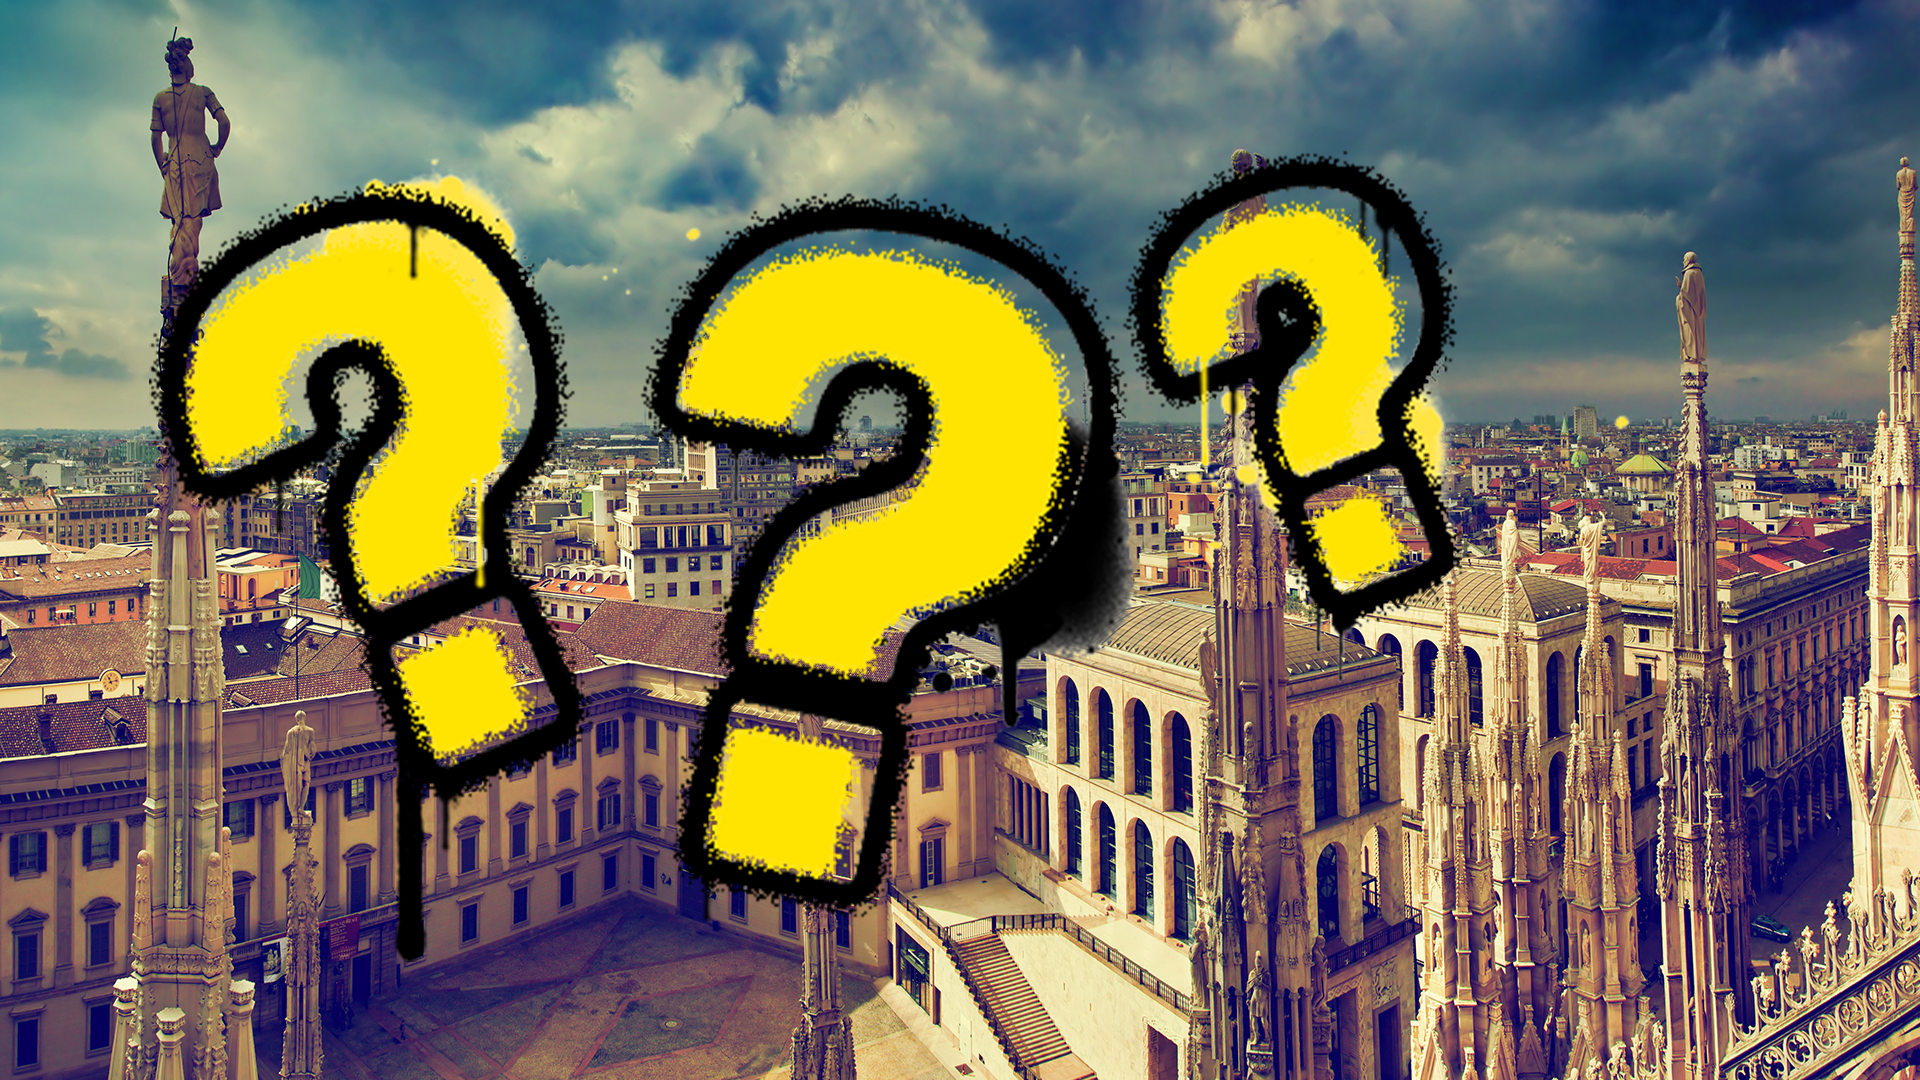 Italian city and question marks